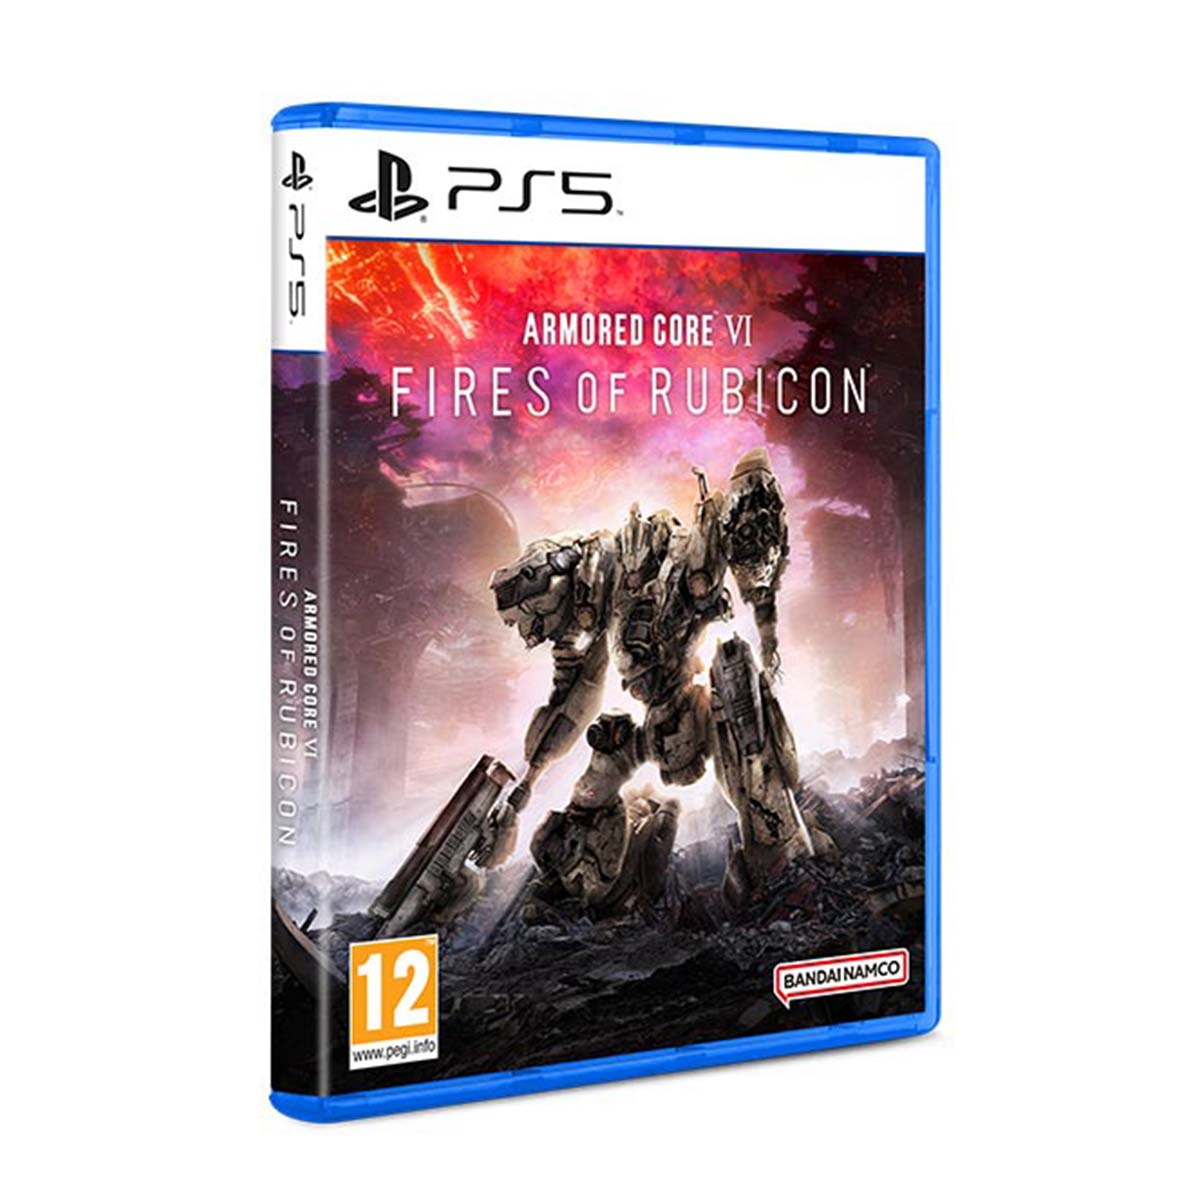 Armored Core VI: Fires of Rubicon Launch Edition - PlayStation 5